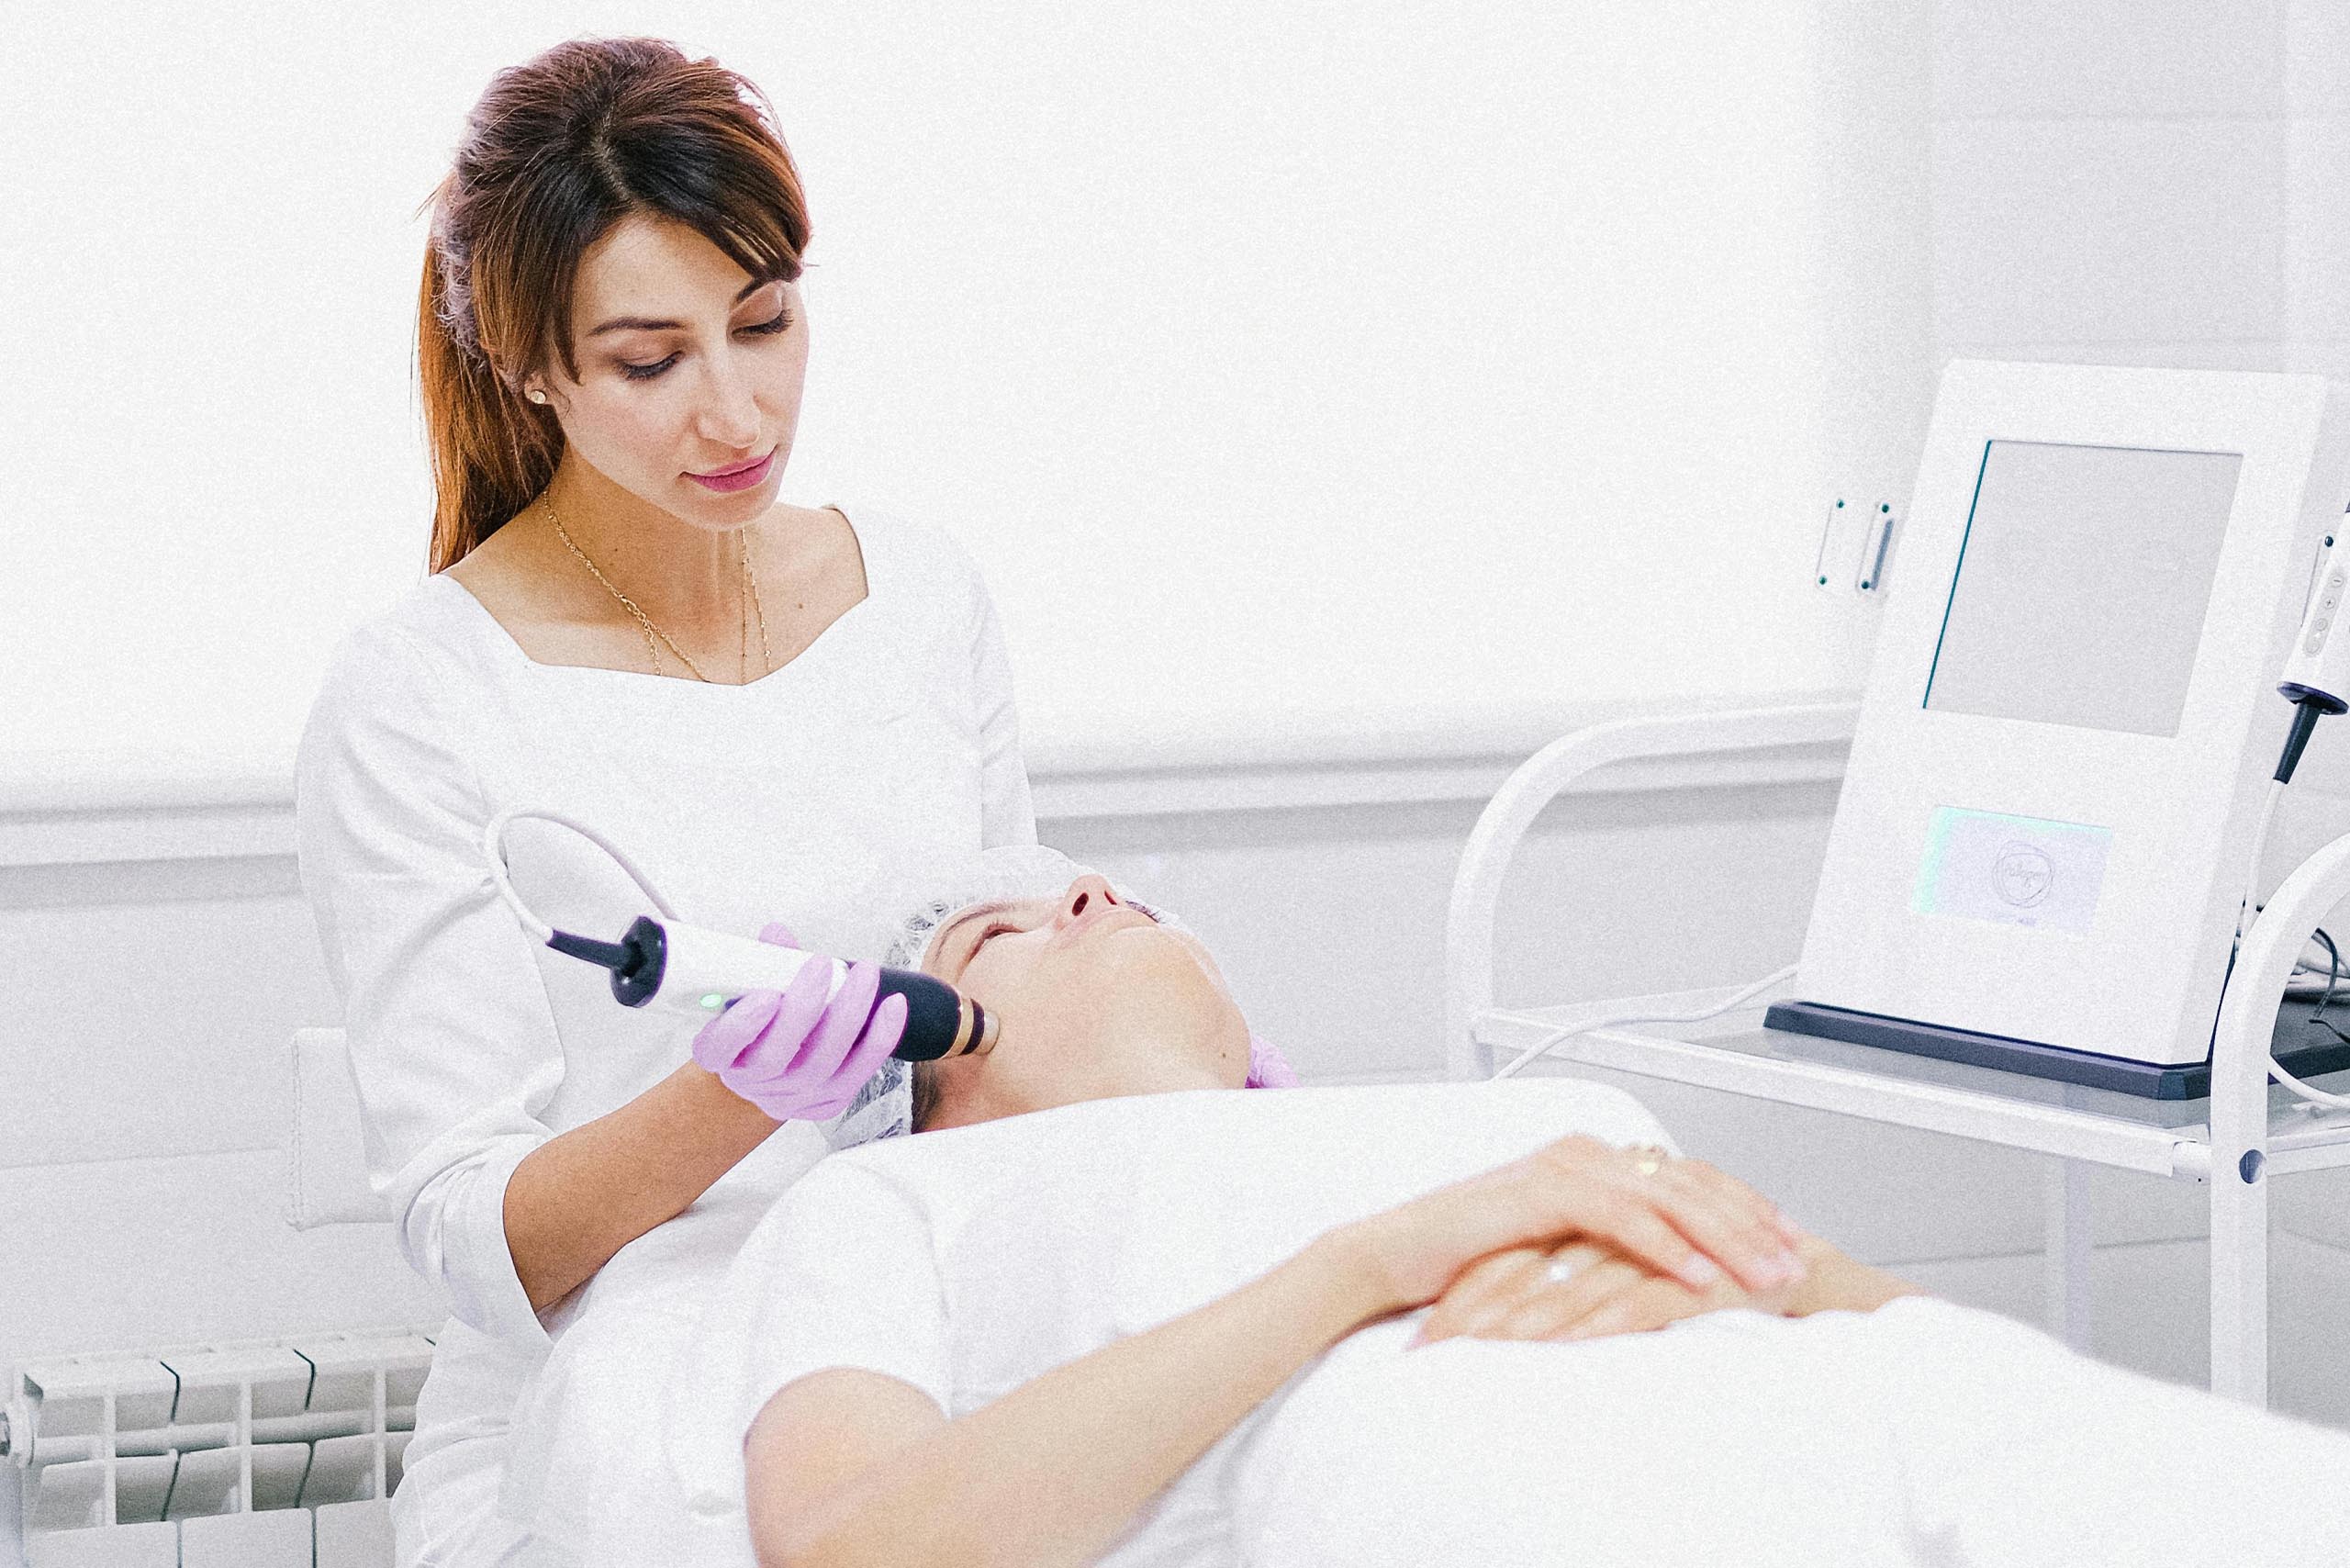 an image of a person performing a laser treatment to a patient